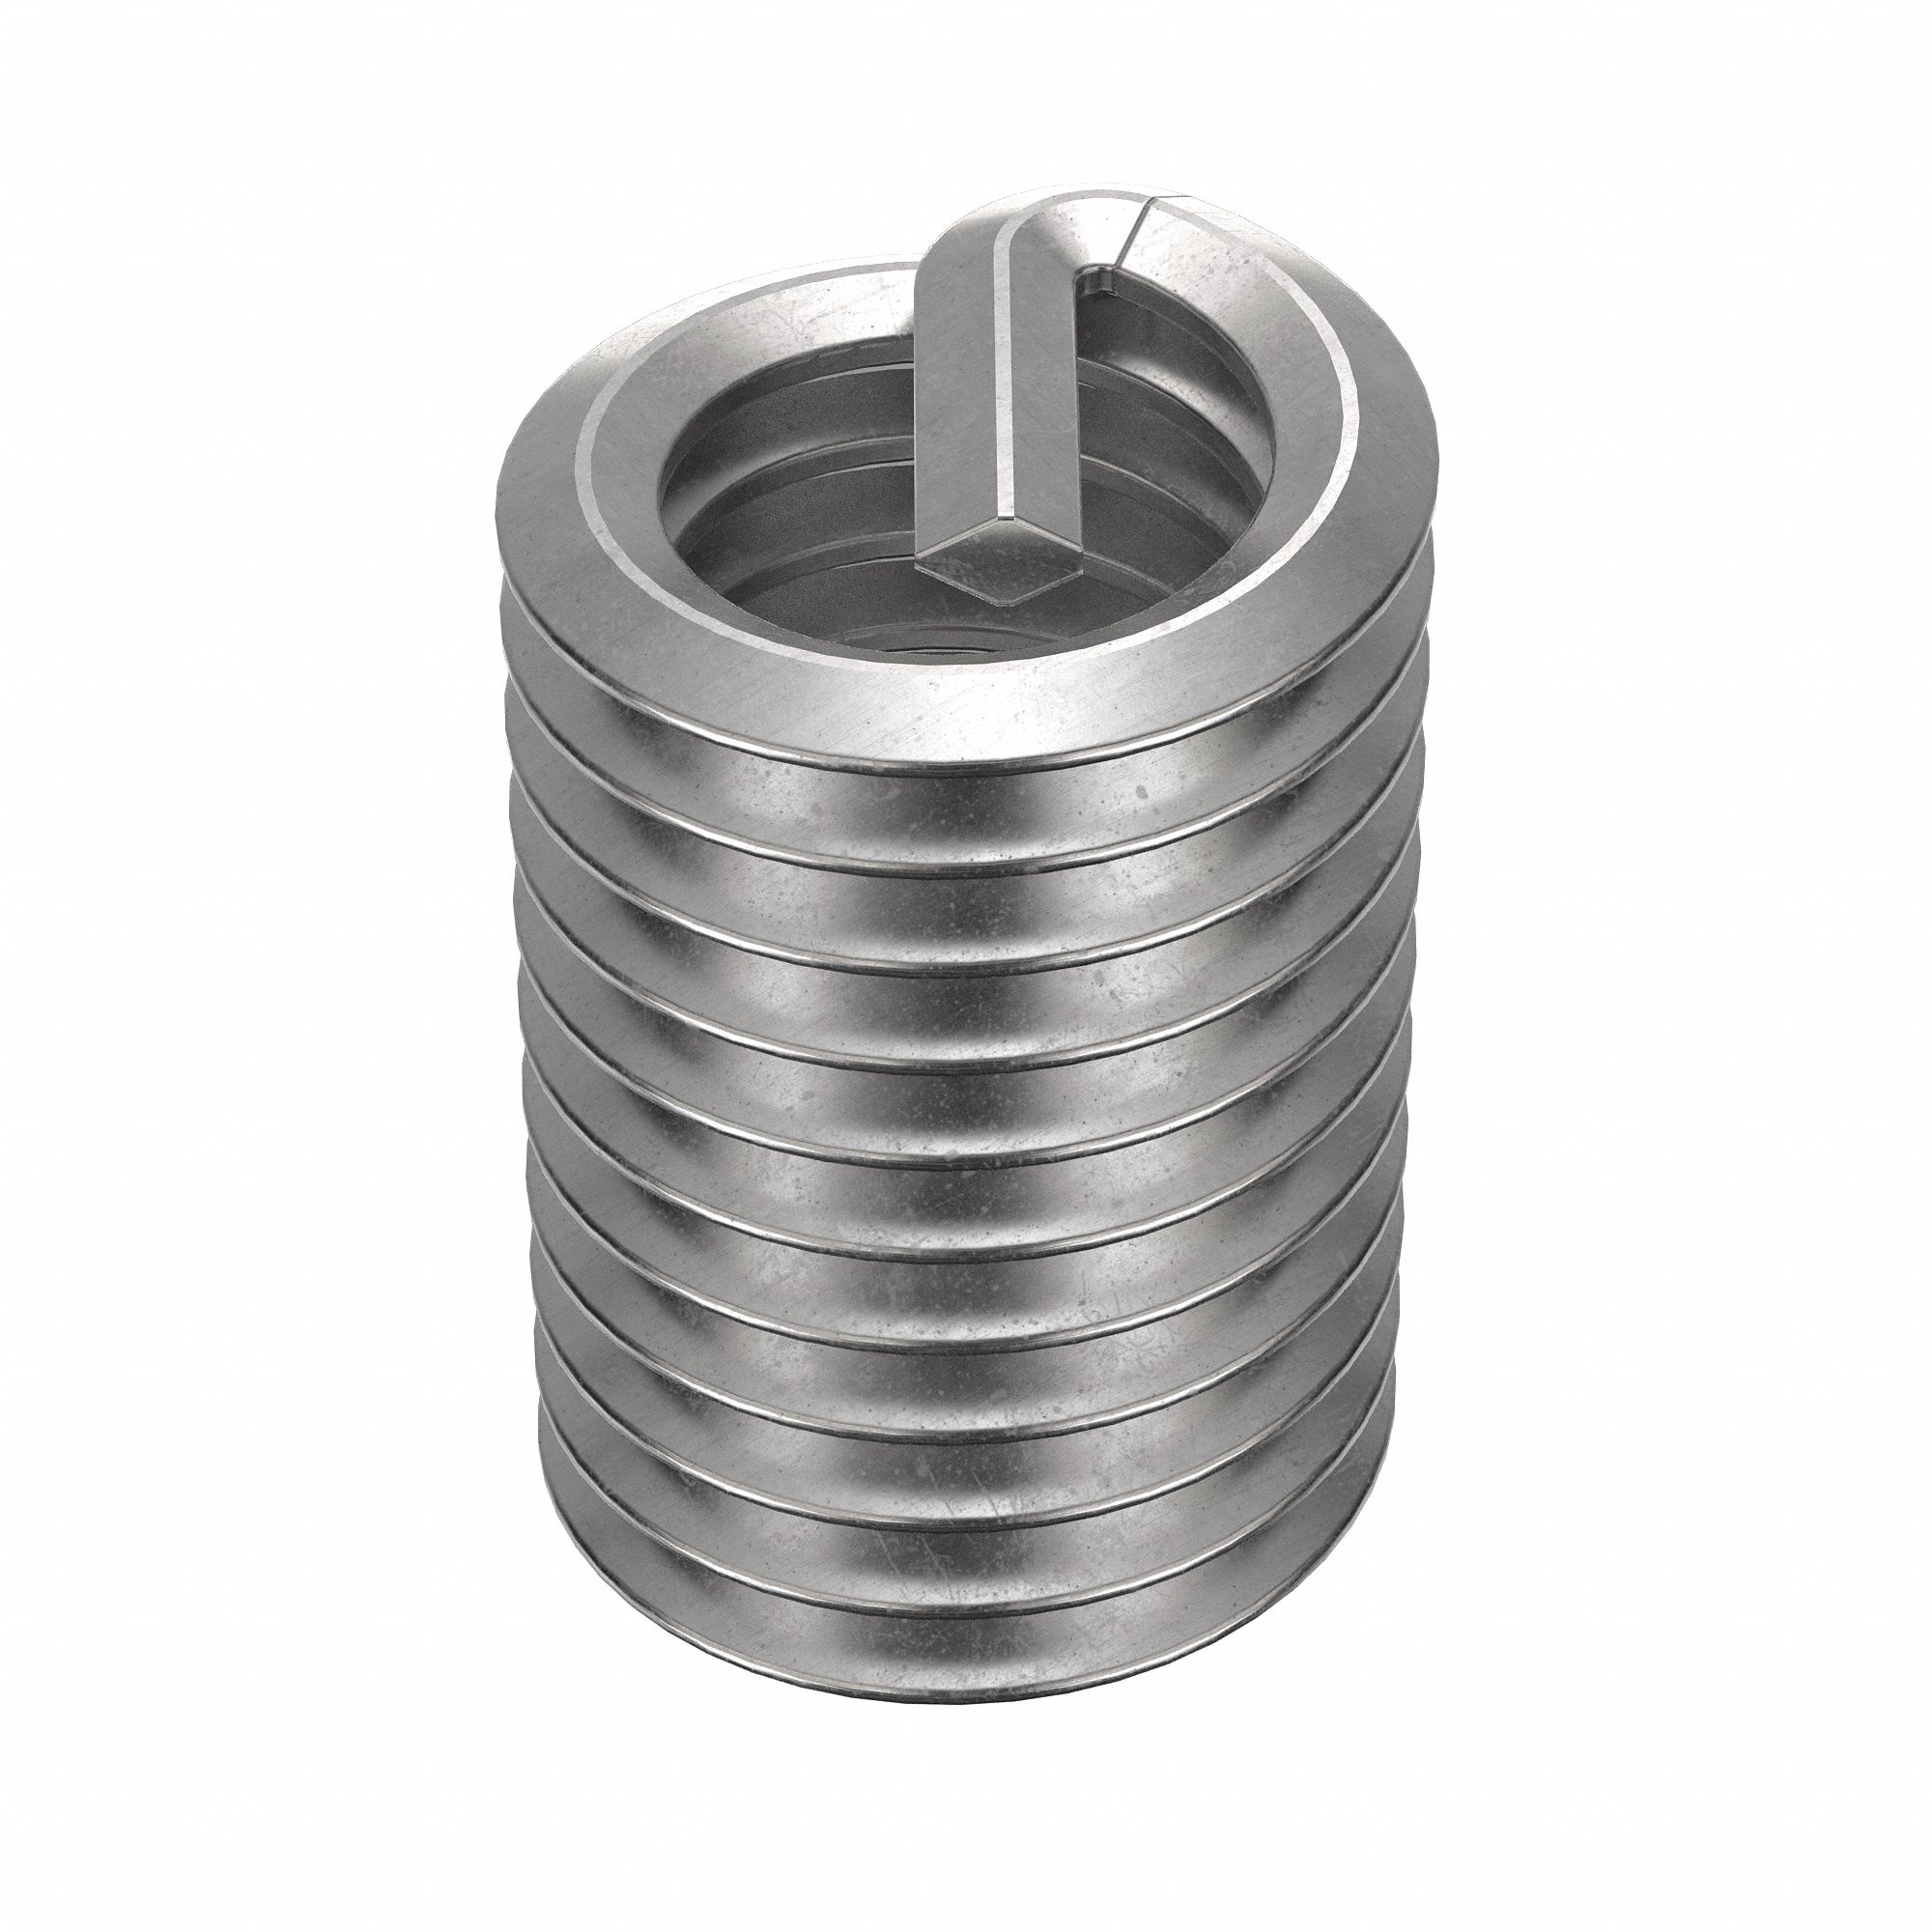 APPROVED VENDOR Helical Insert: Tanged Tang Style, Free-Running, 3/8